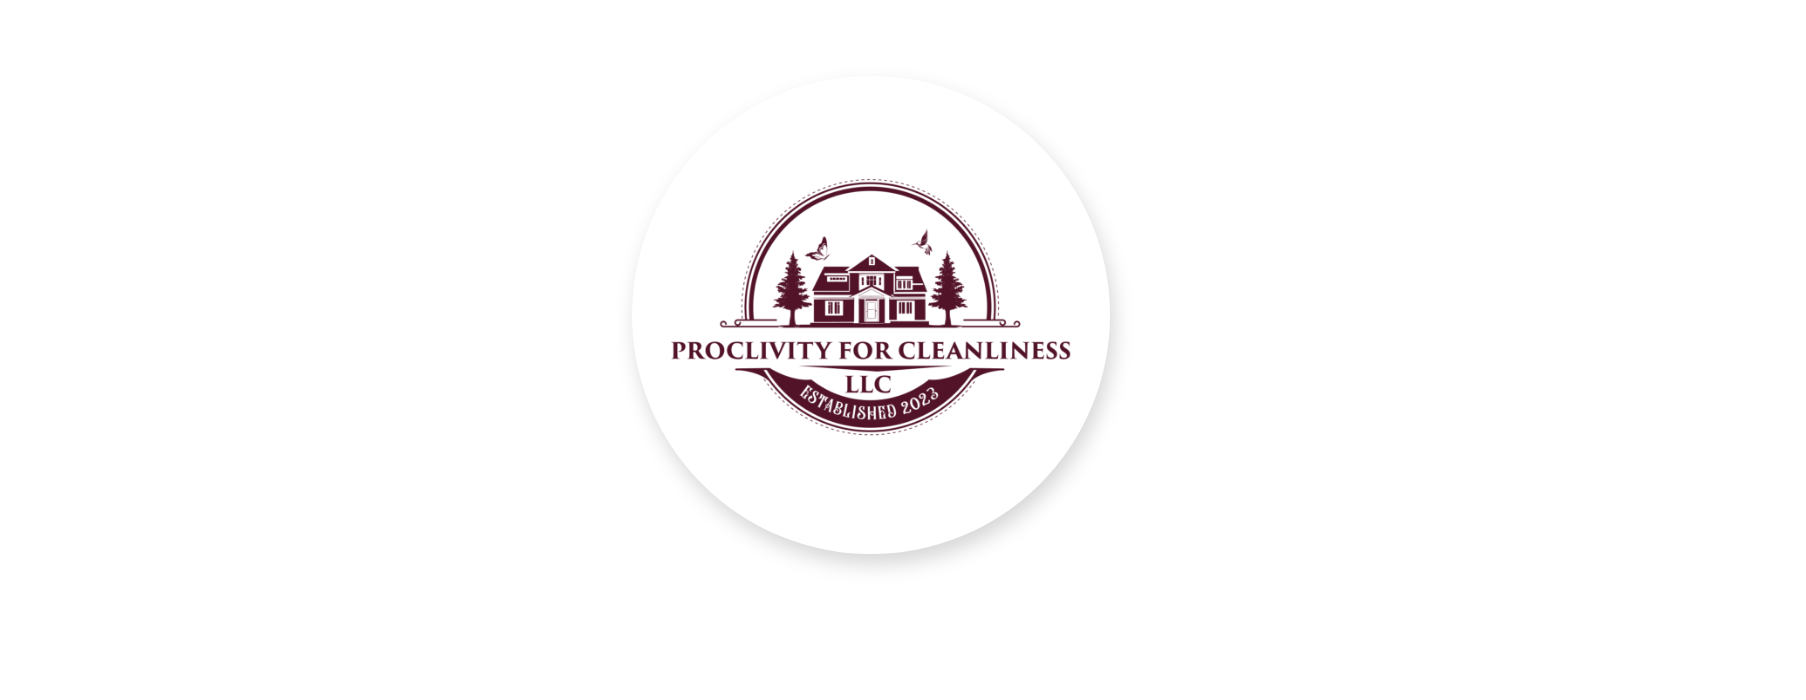 Proclivity For Cleanliness